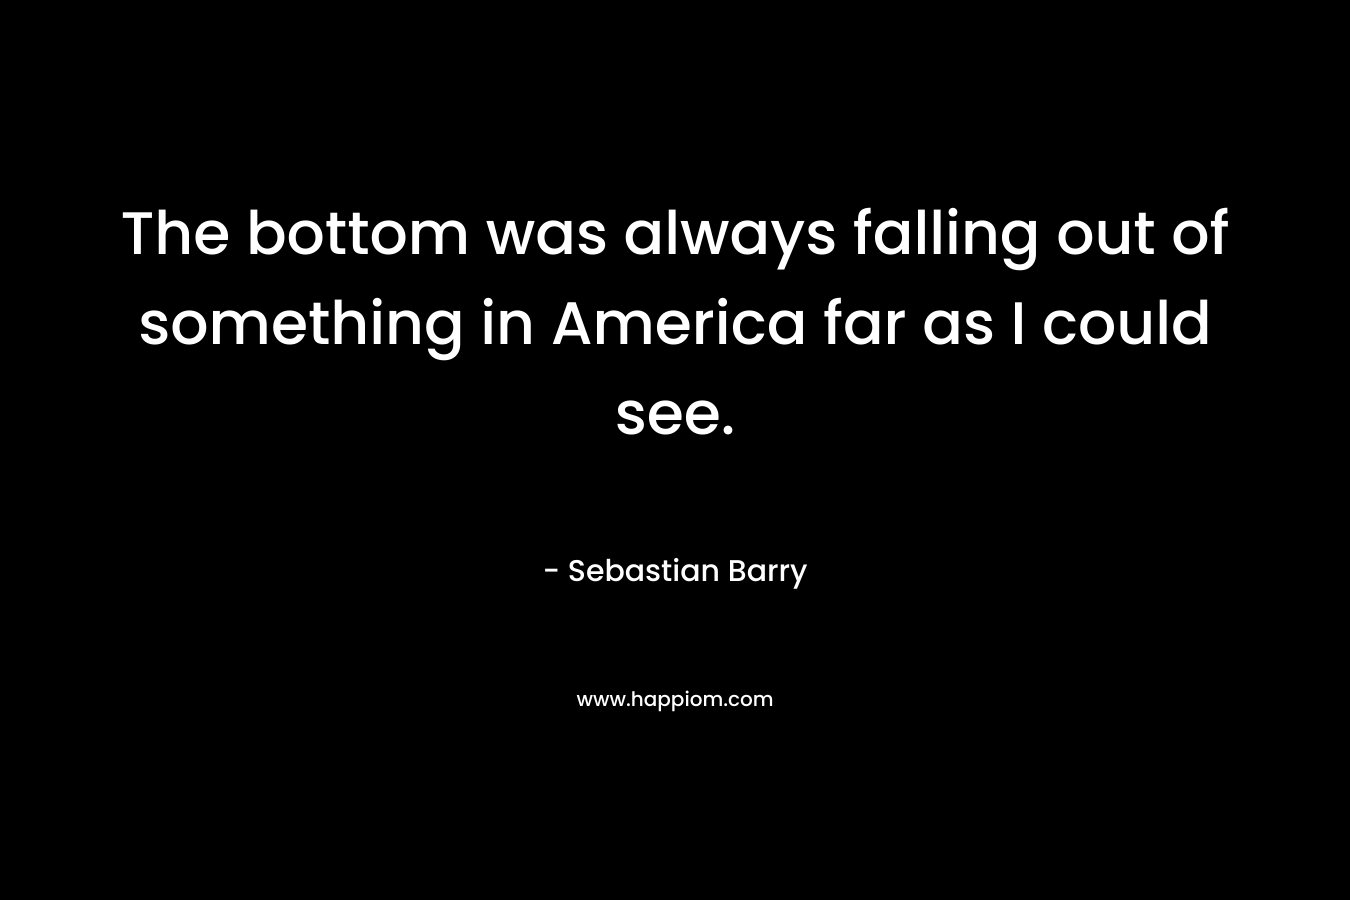 The bottom was always falling out of something in America far as I could see.